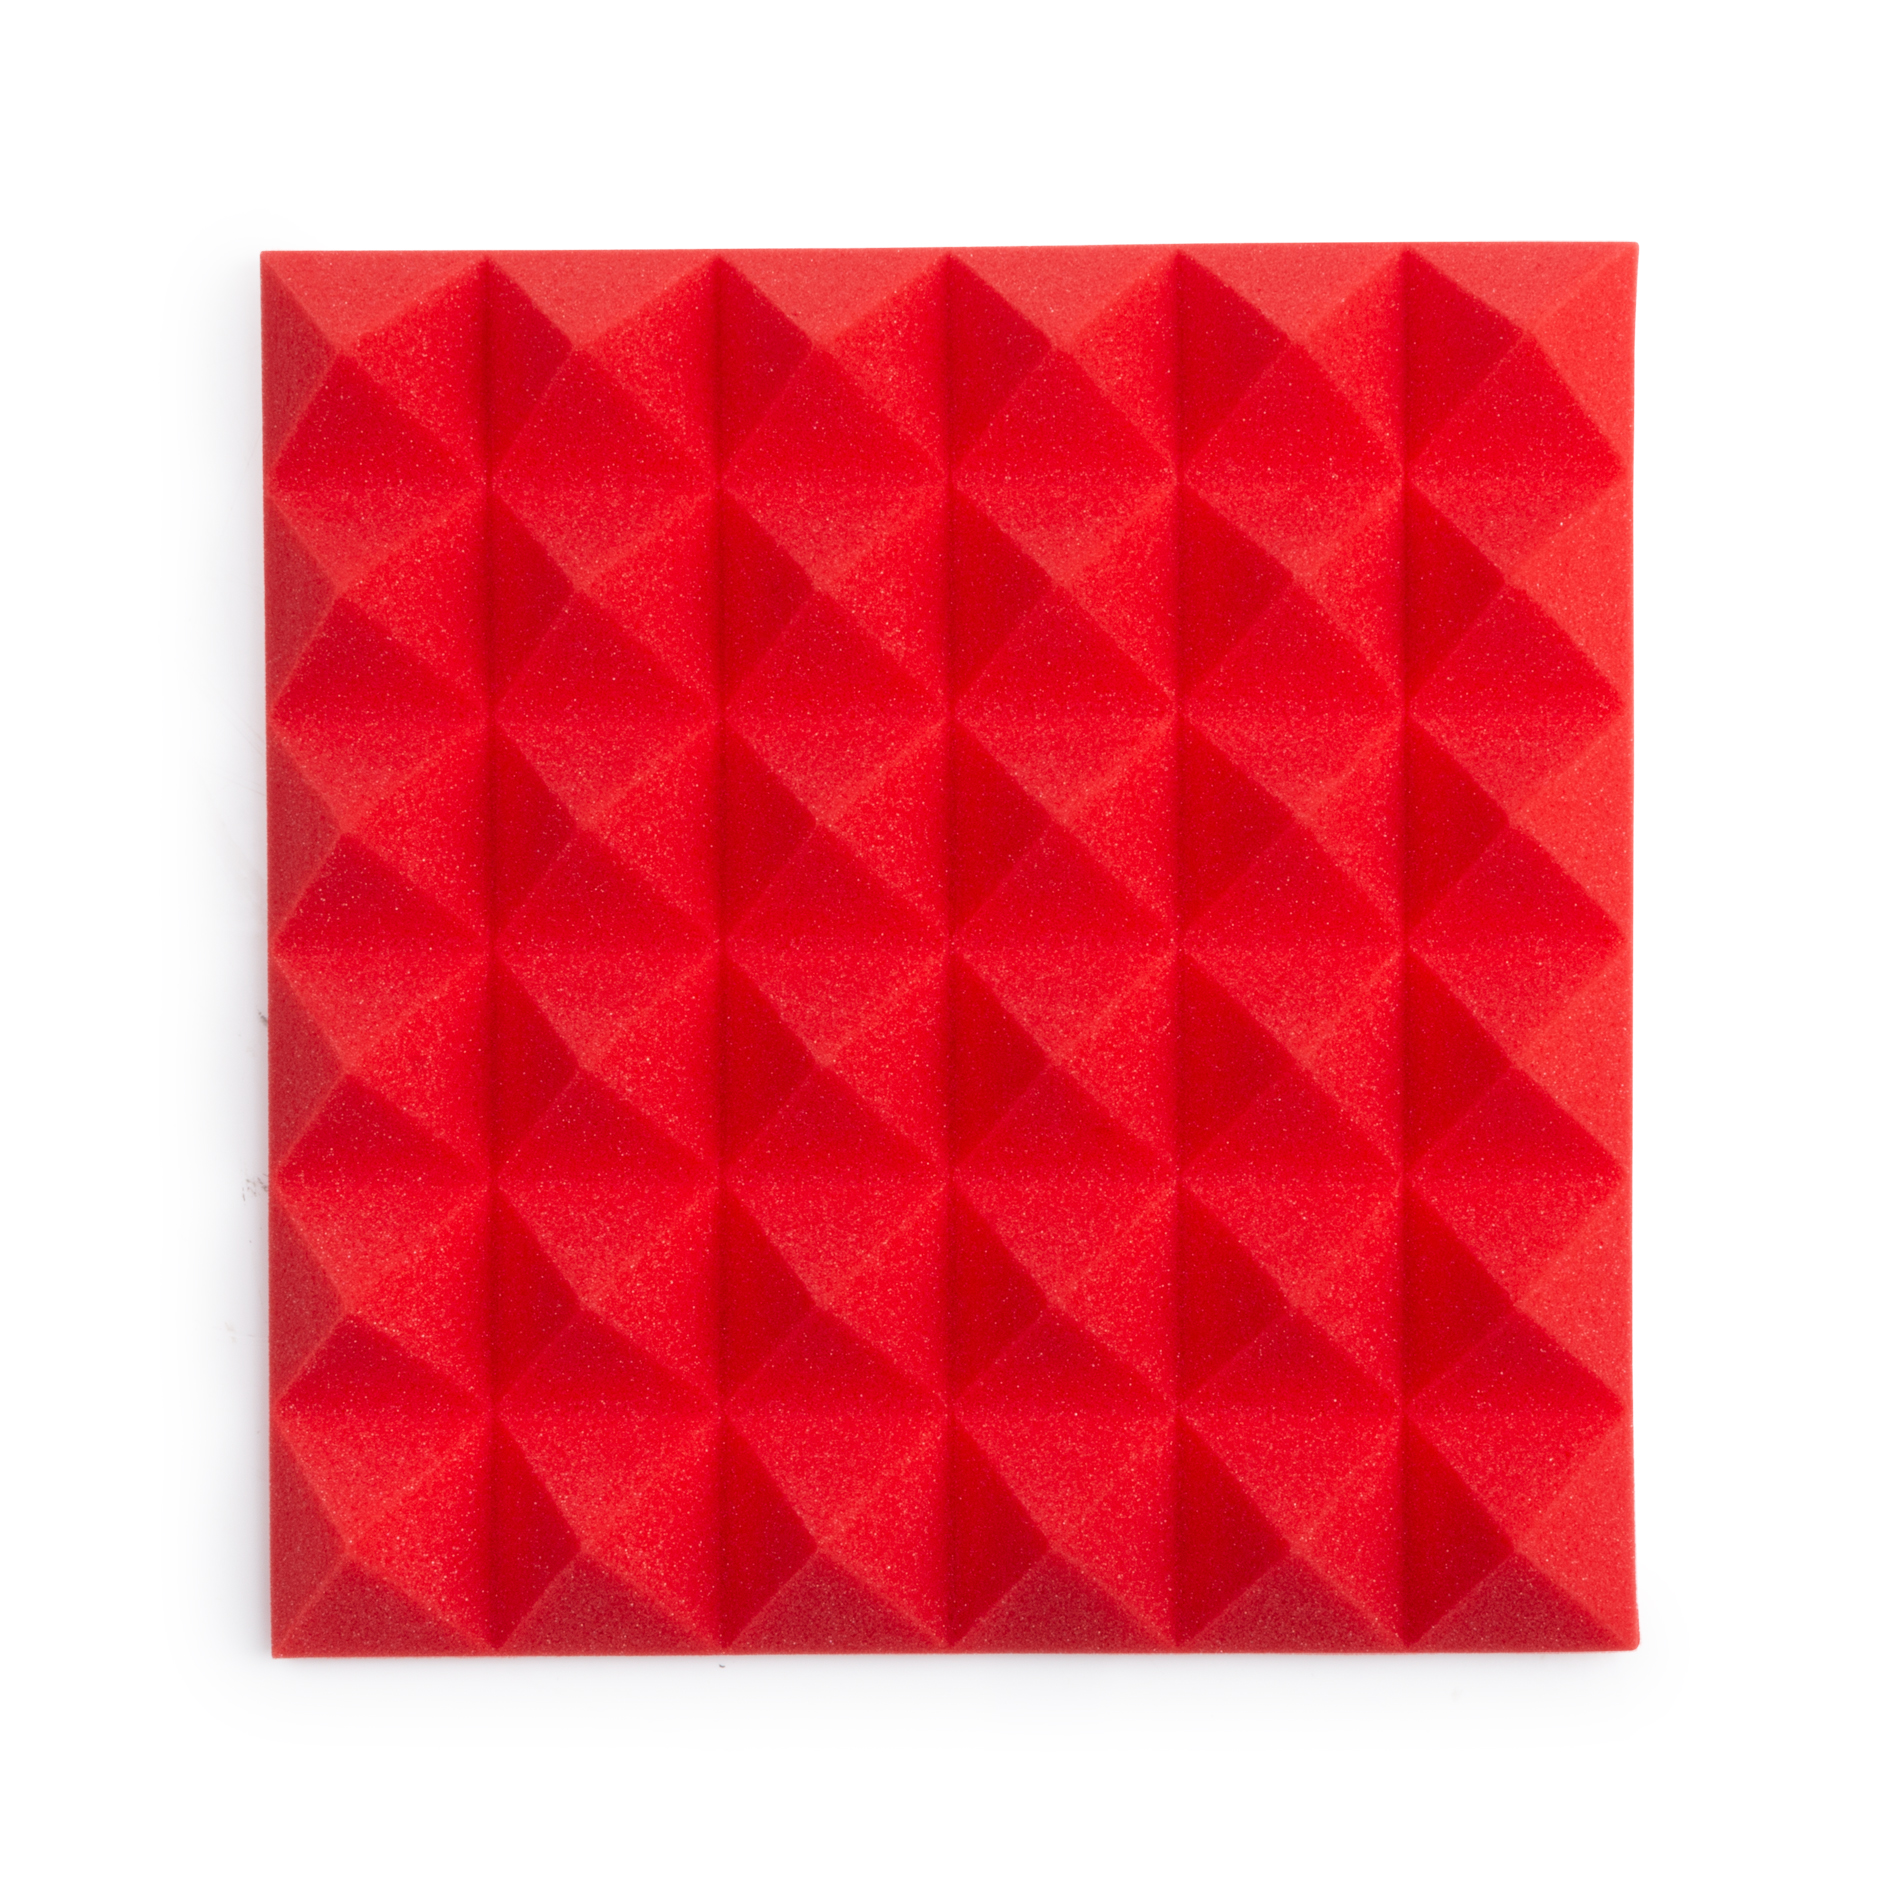 8 Pack of Red 12×12″ Acoustic Pyramid Panel-GFW-ACPNL1212PRED-8PK